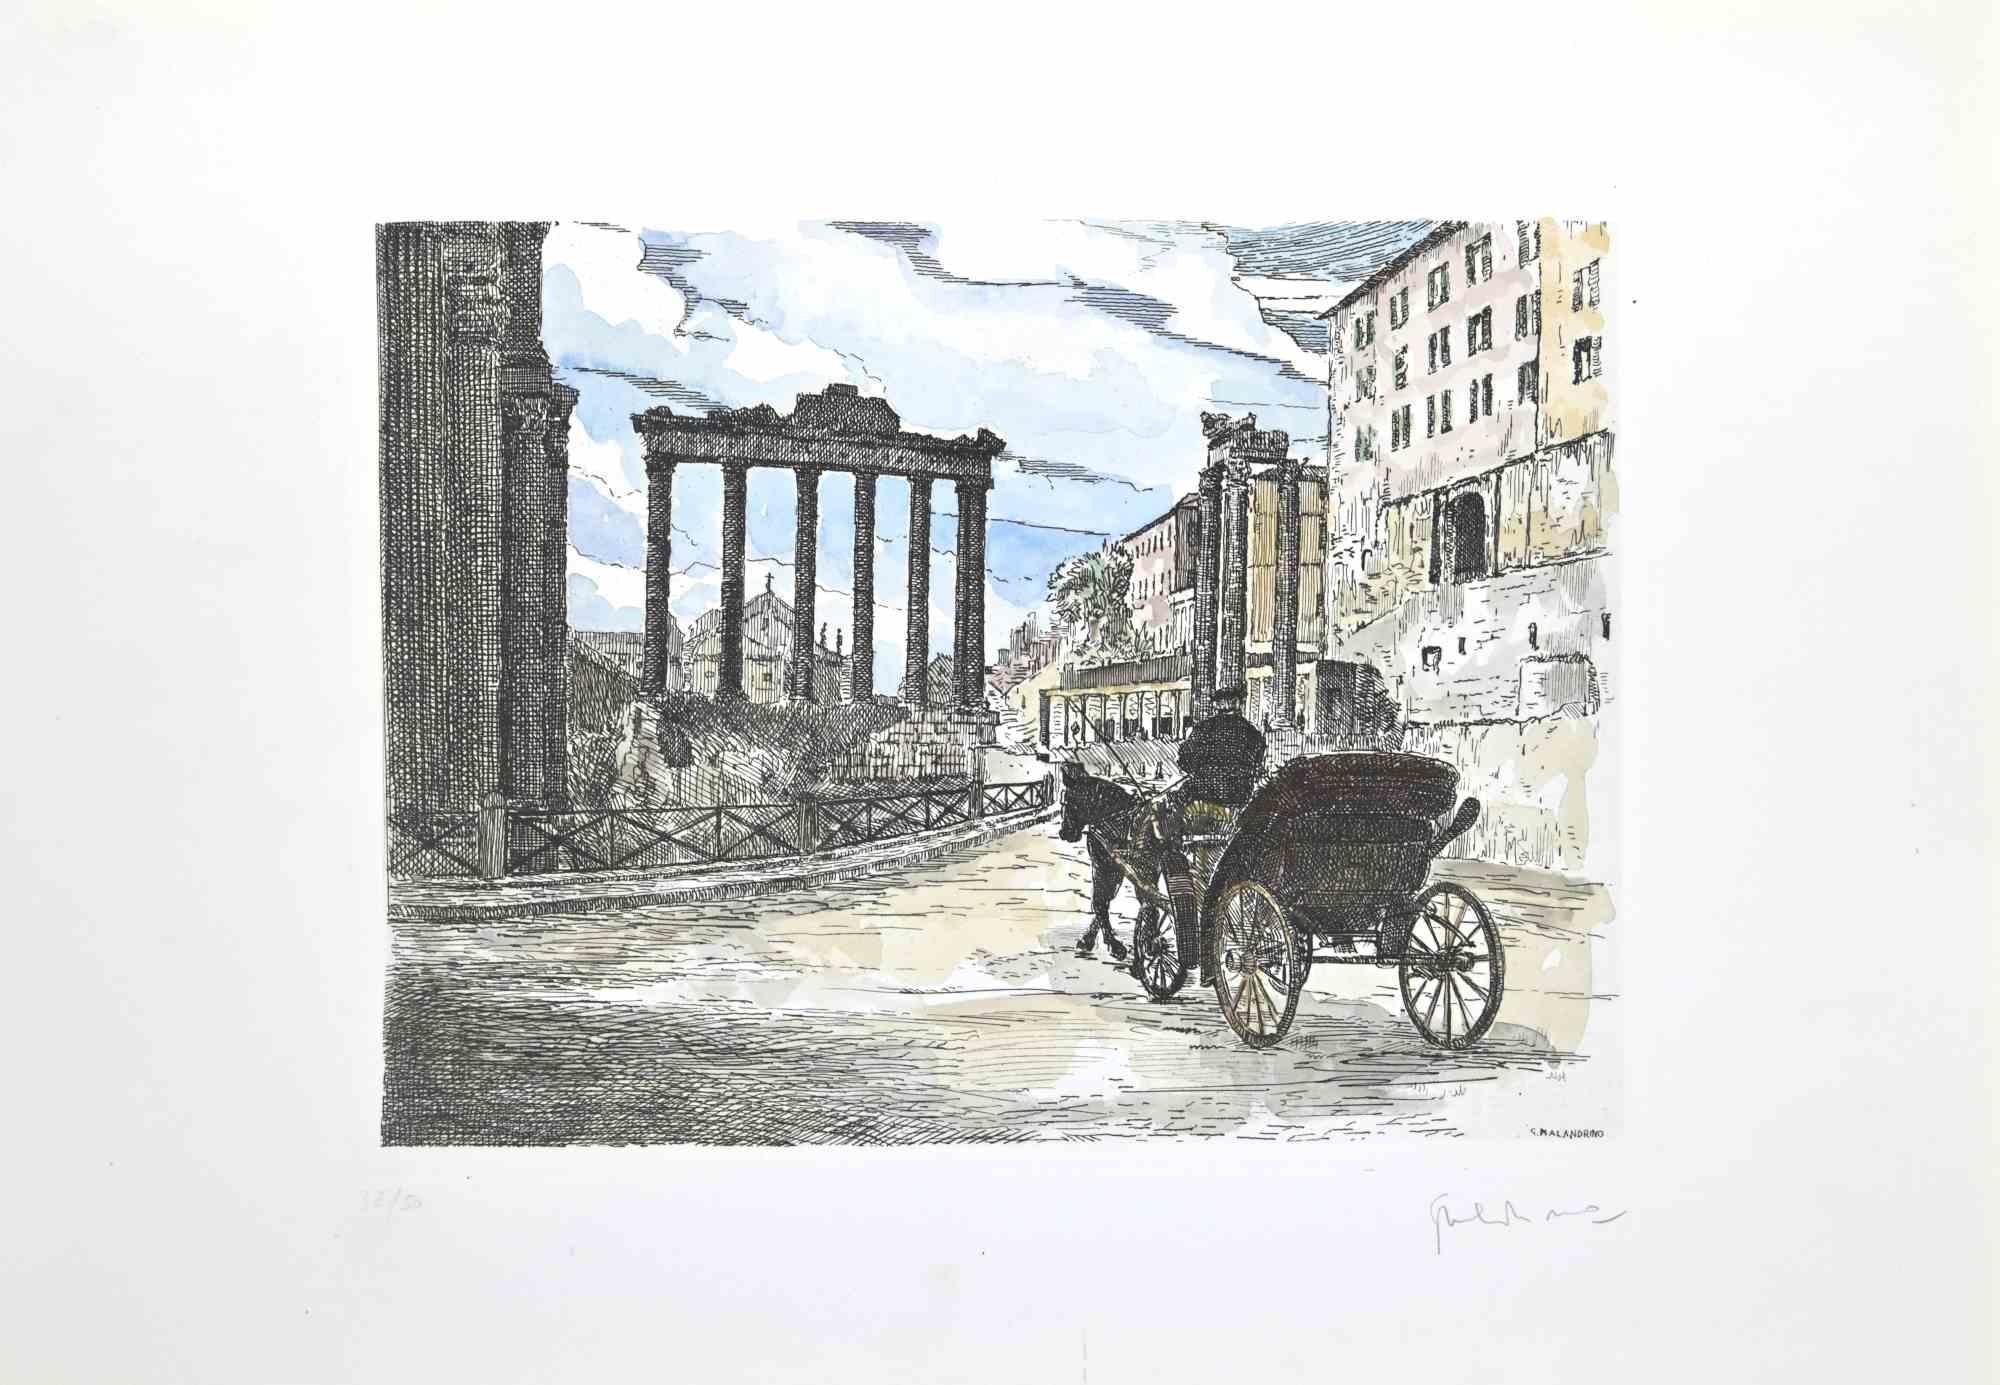 Roman Forum is an artwork realized by Giuseppe Malandrino.

Original print in etching technique and hand watercolored.

Hand-signed by the artist in pencil on the lower right corner.

Numbered edition of 50 copies.

Good condition. 

This artwork